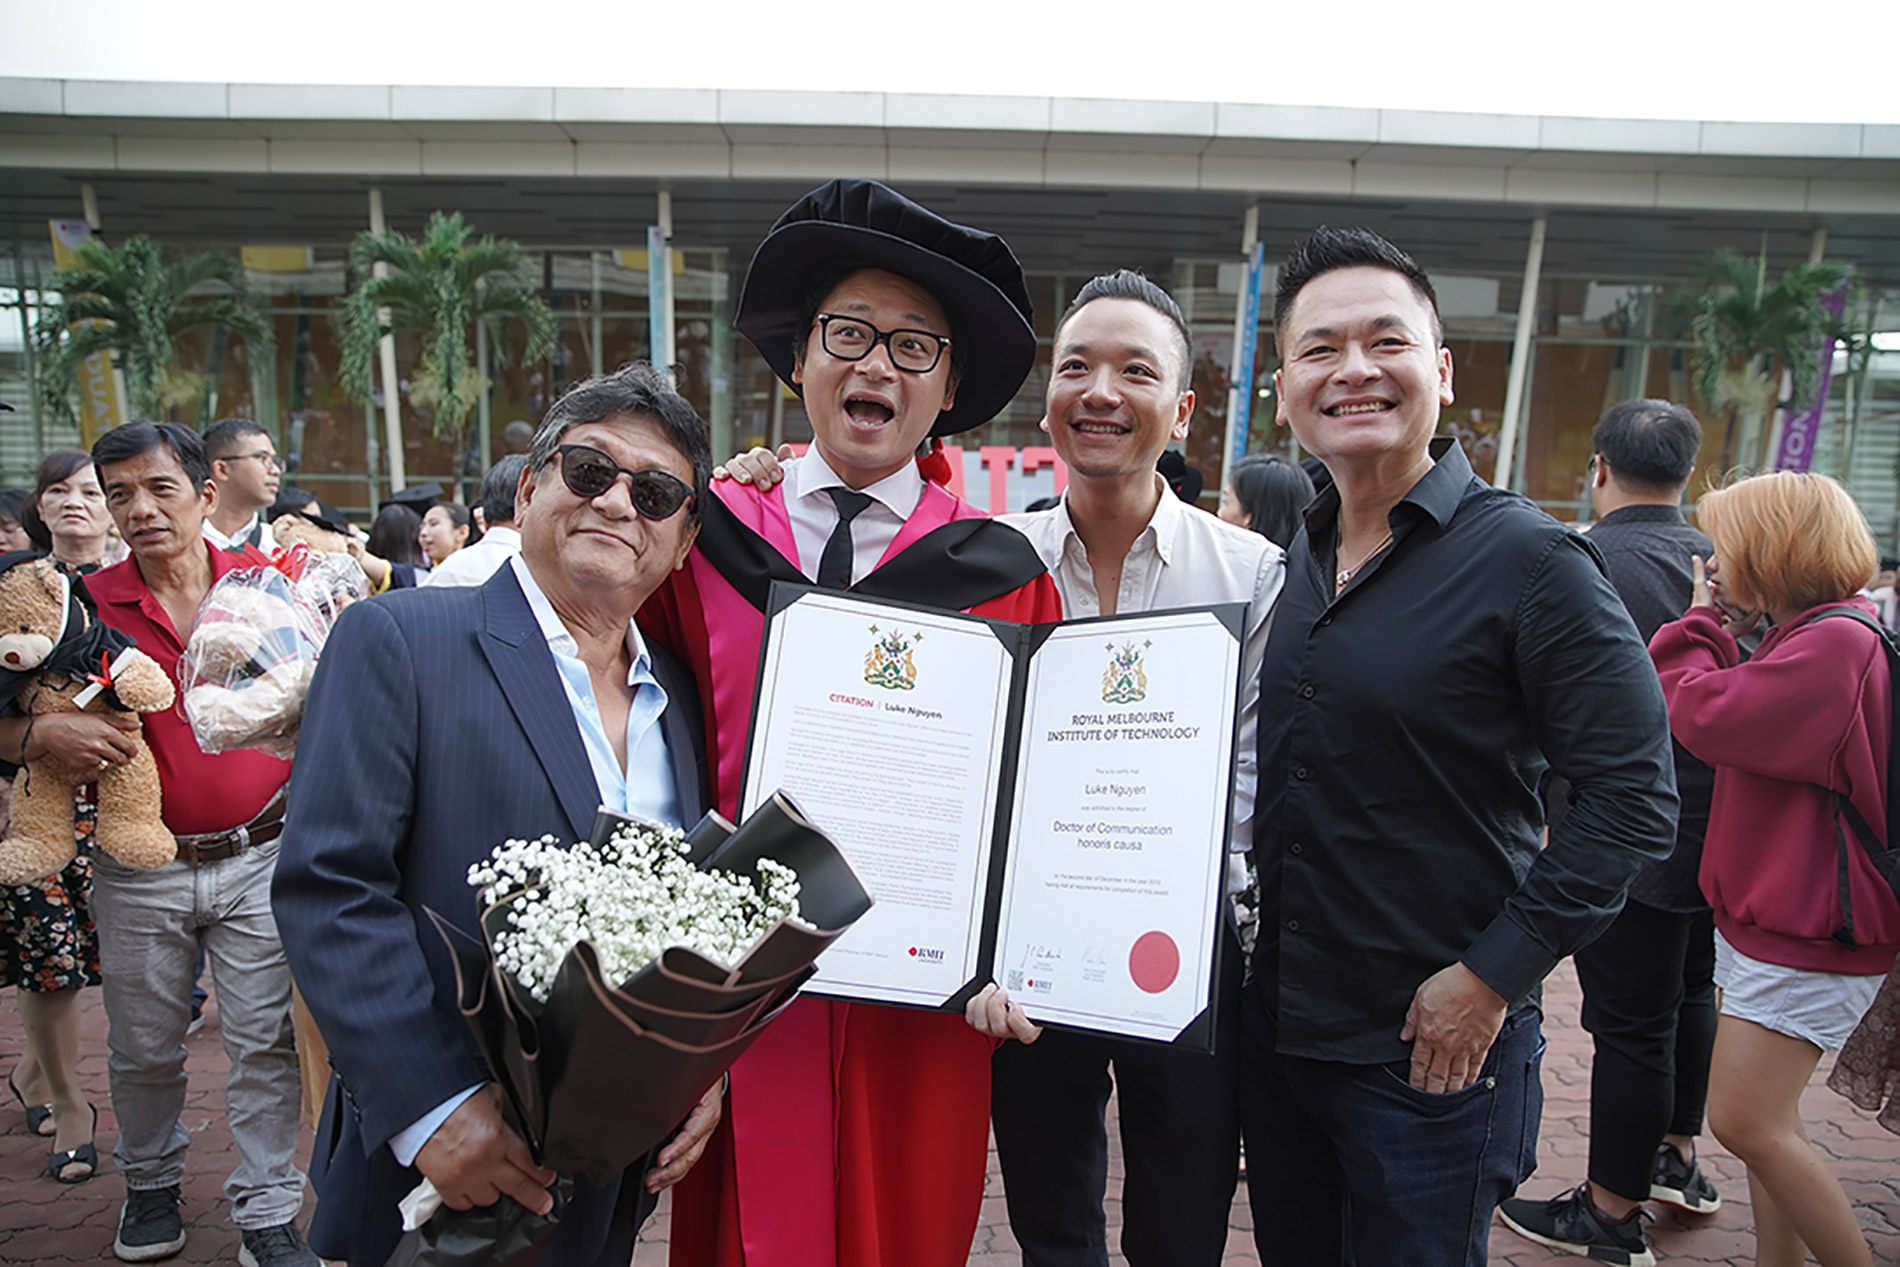 RMIT University’s newly awarded Honorary Doctorate (in gown) and his family at the RMIT Graduation Ceremony at its Saigon South campus on 2 December.